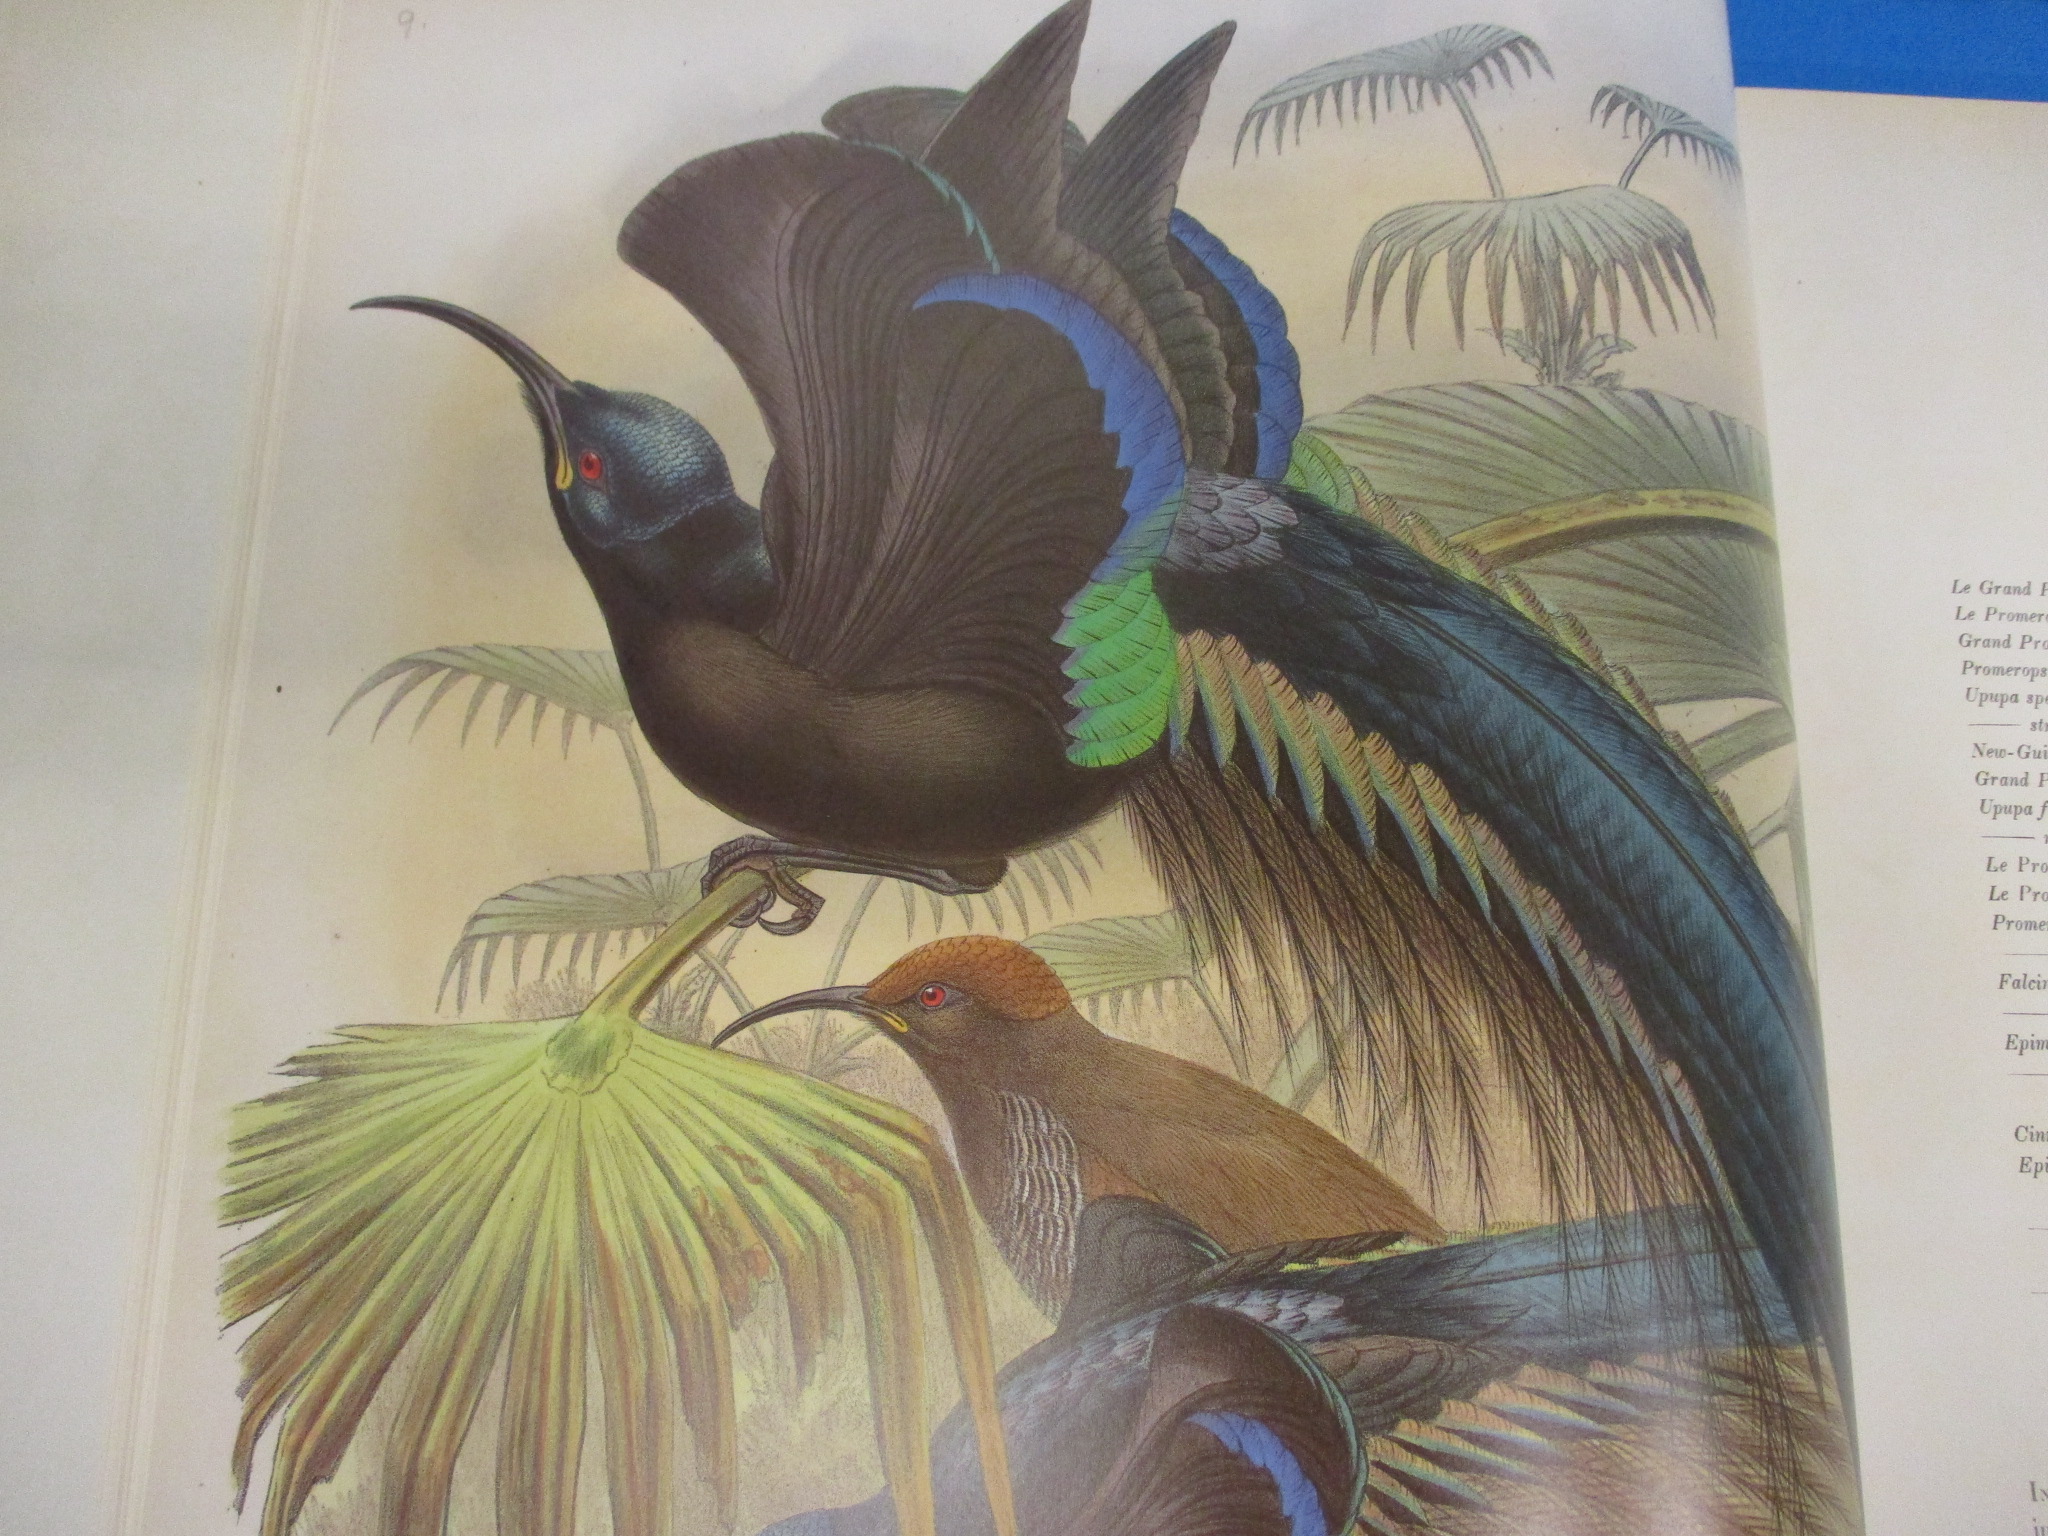 A British museum edition of The Birds of New Guinea by John Gould - Image 10 of 11